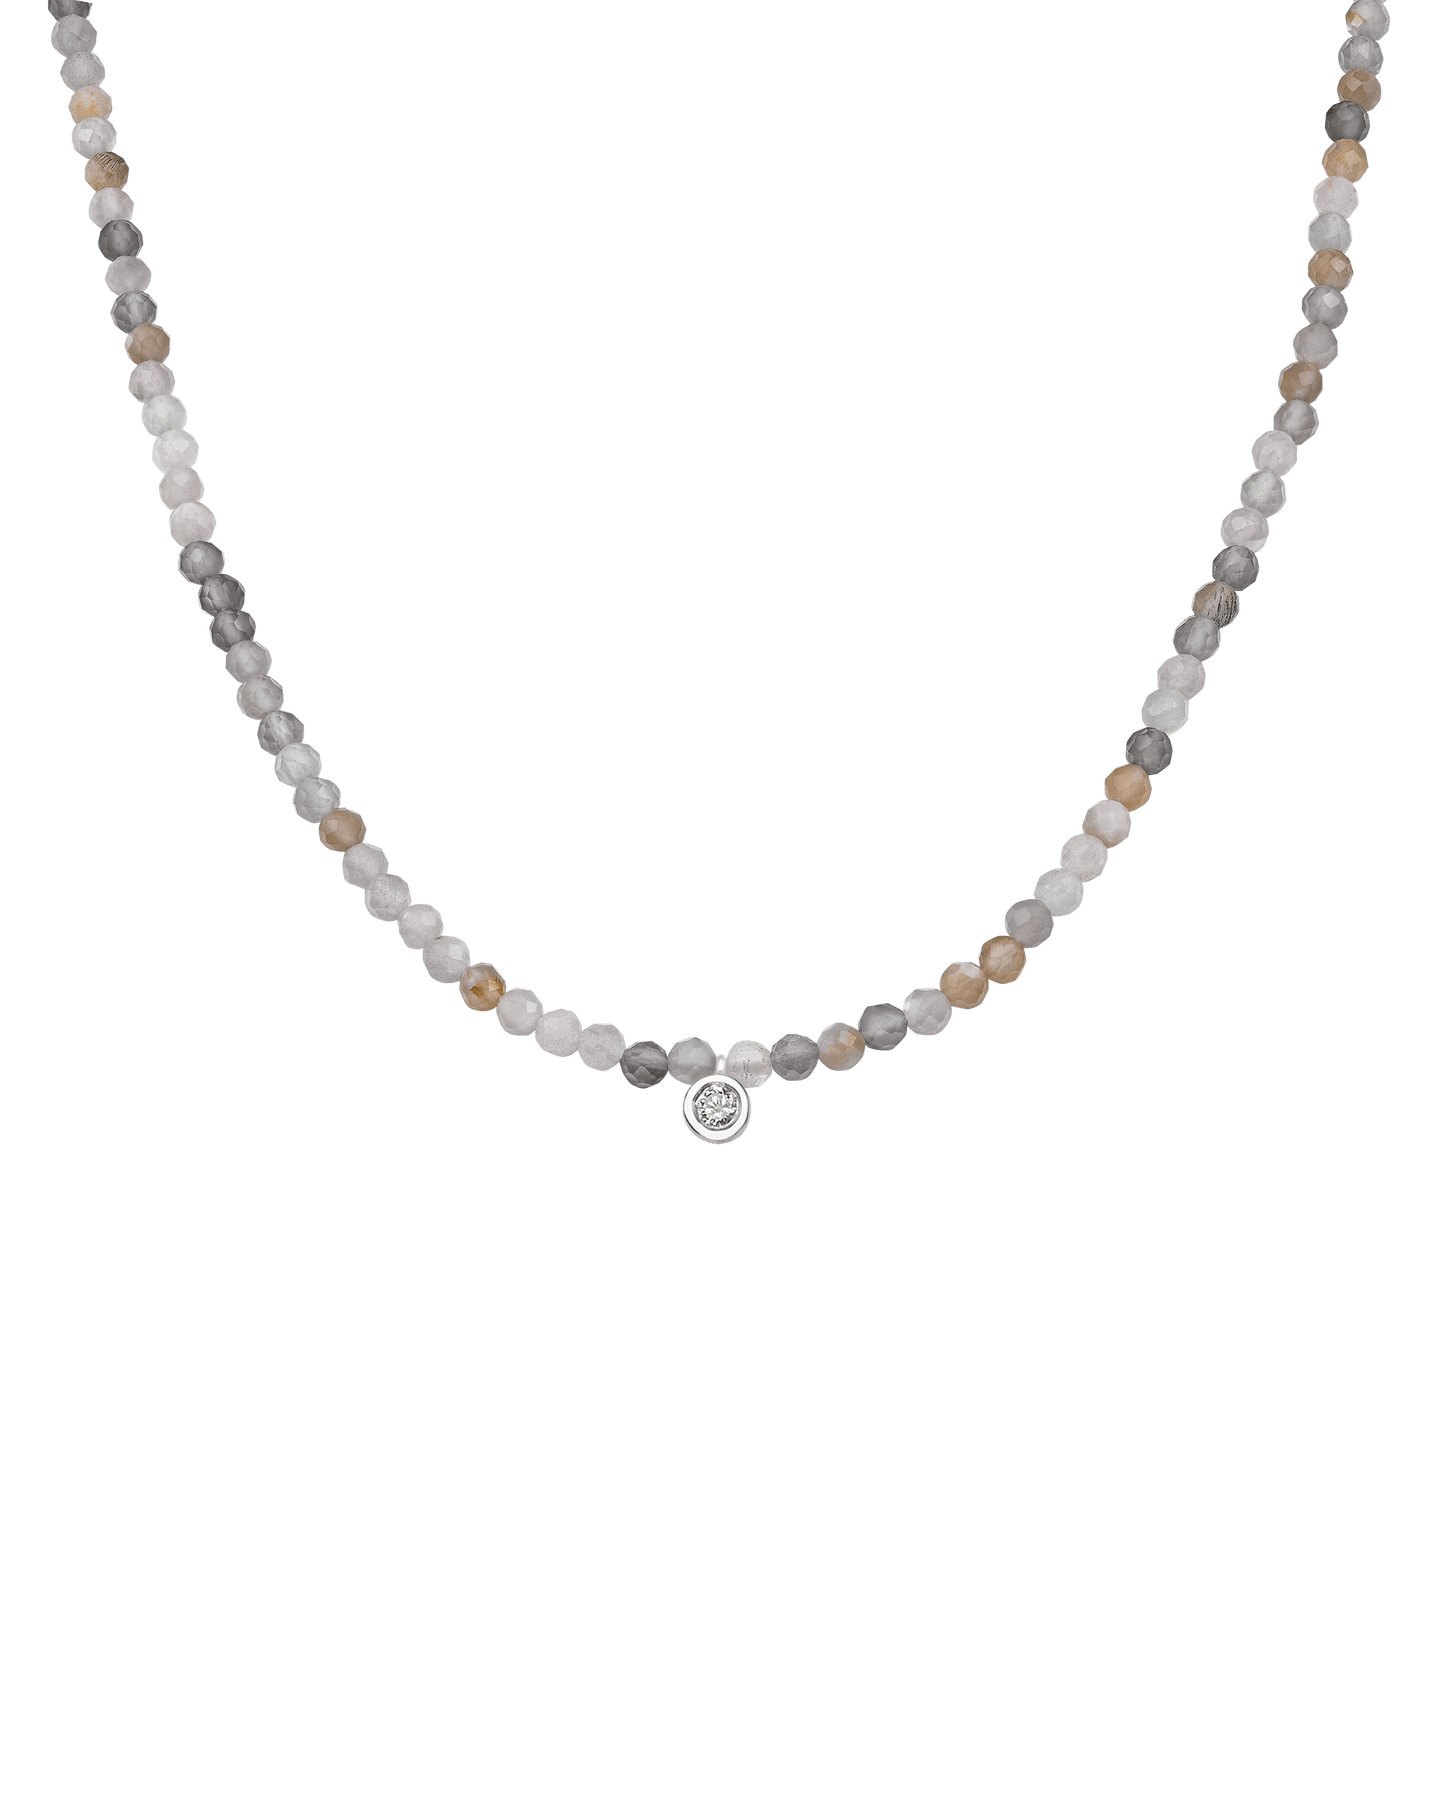 The Gemstone & Diamond Necklace - 14K White Gold Necklaces 14K Solid Gold Natural Moonstone Medium: 0.04ct 14"